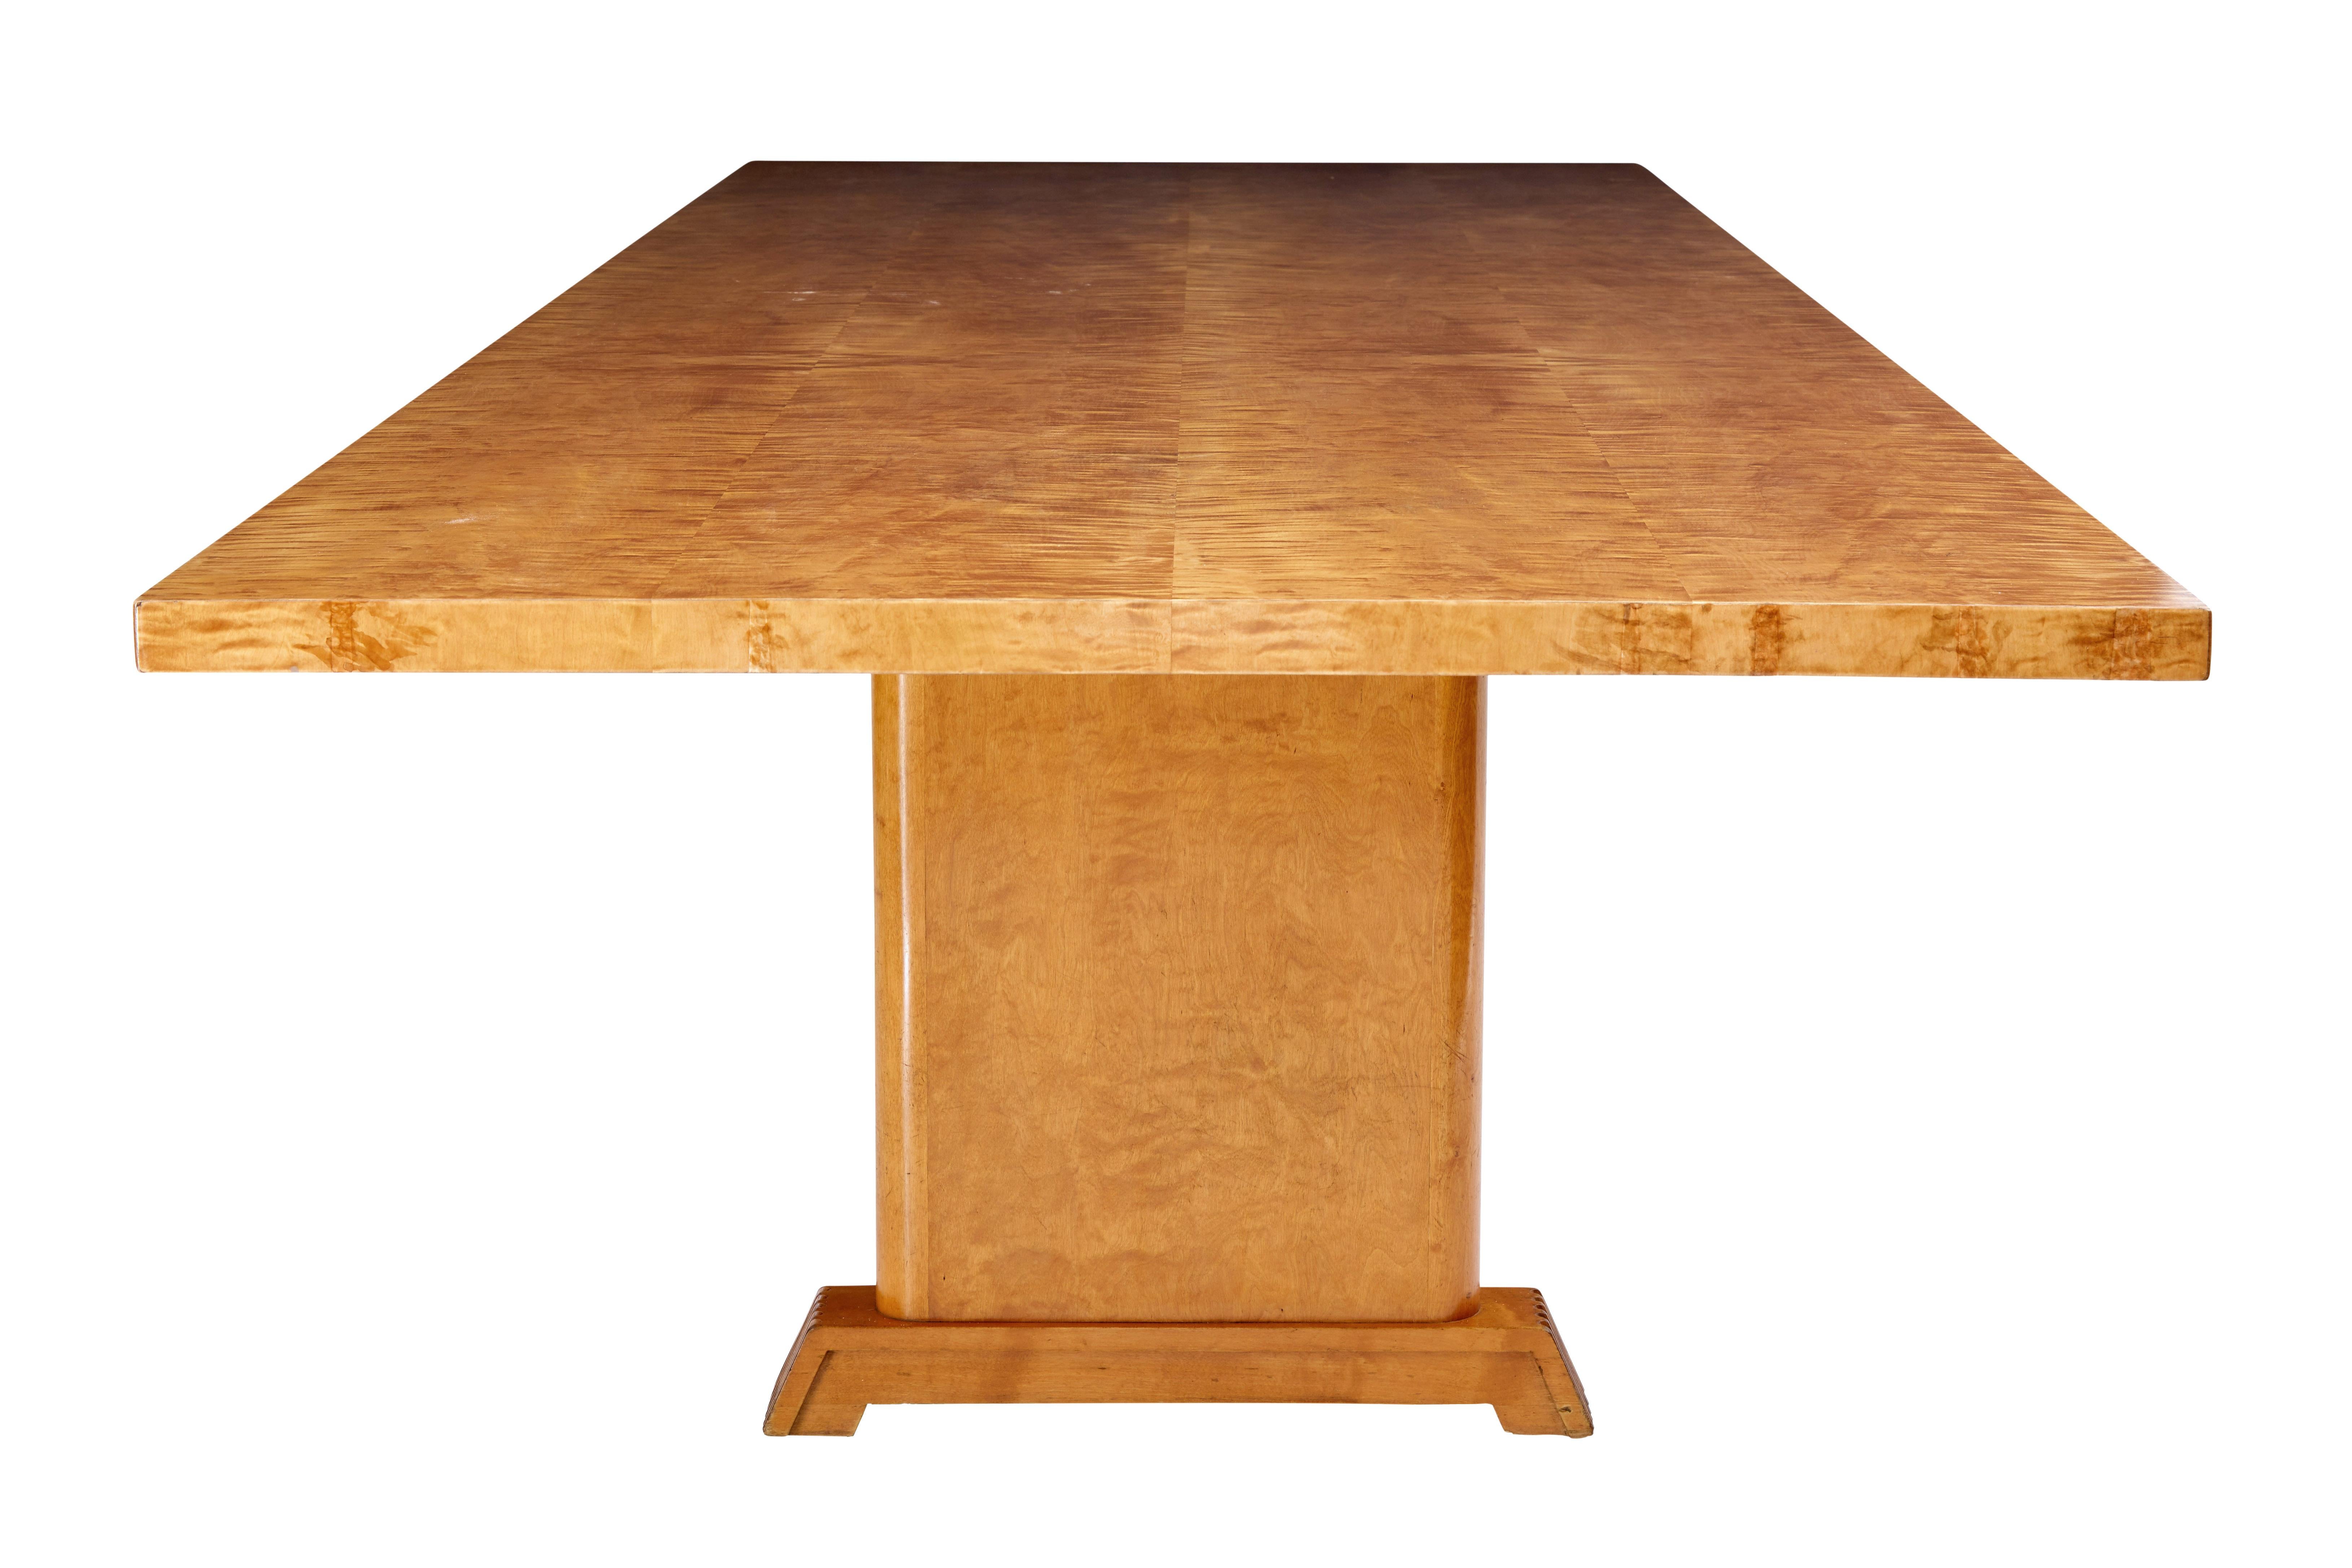 Art Deco Mid-20th Century Birch Library Table of Large Proportions